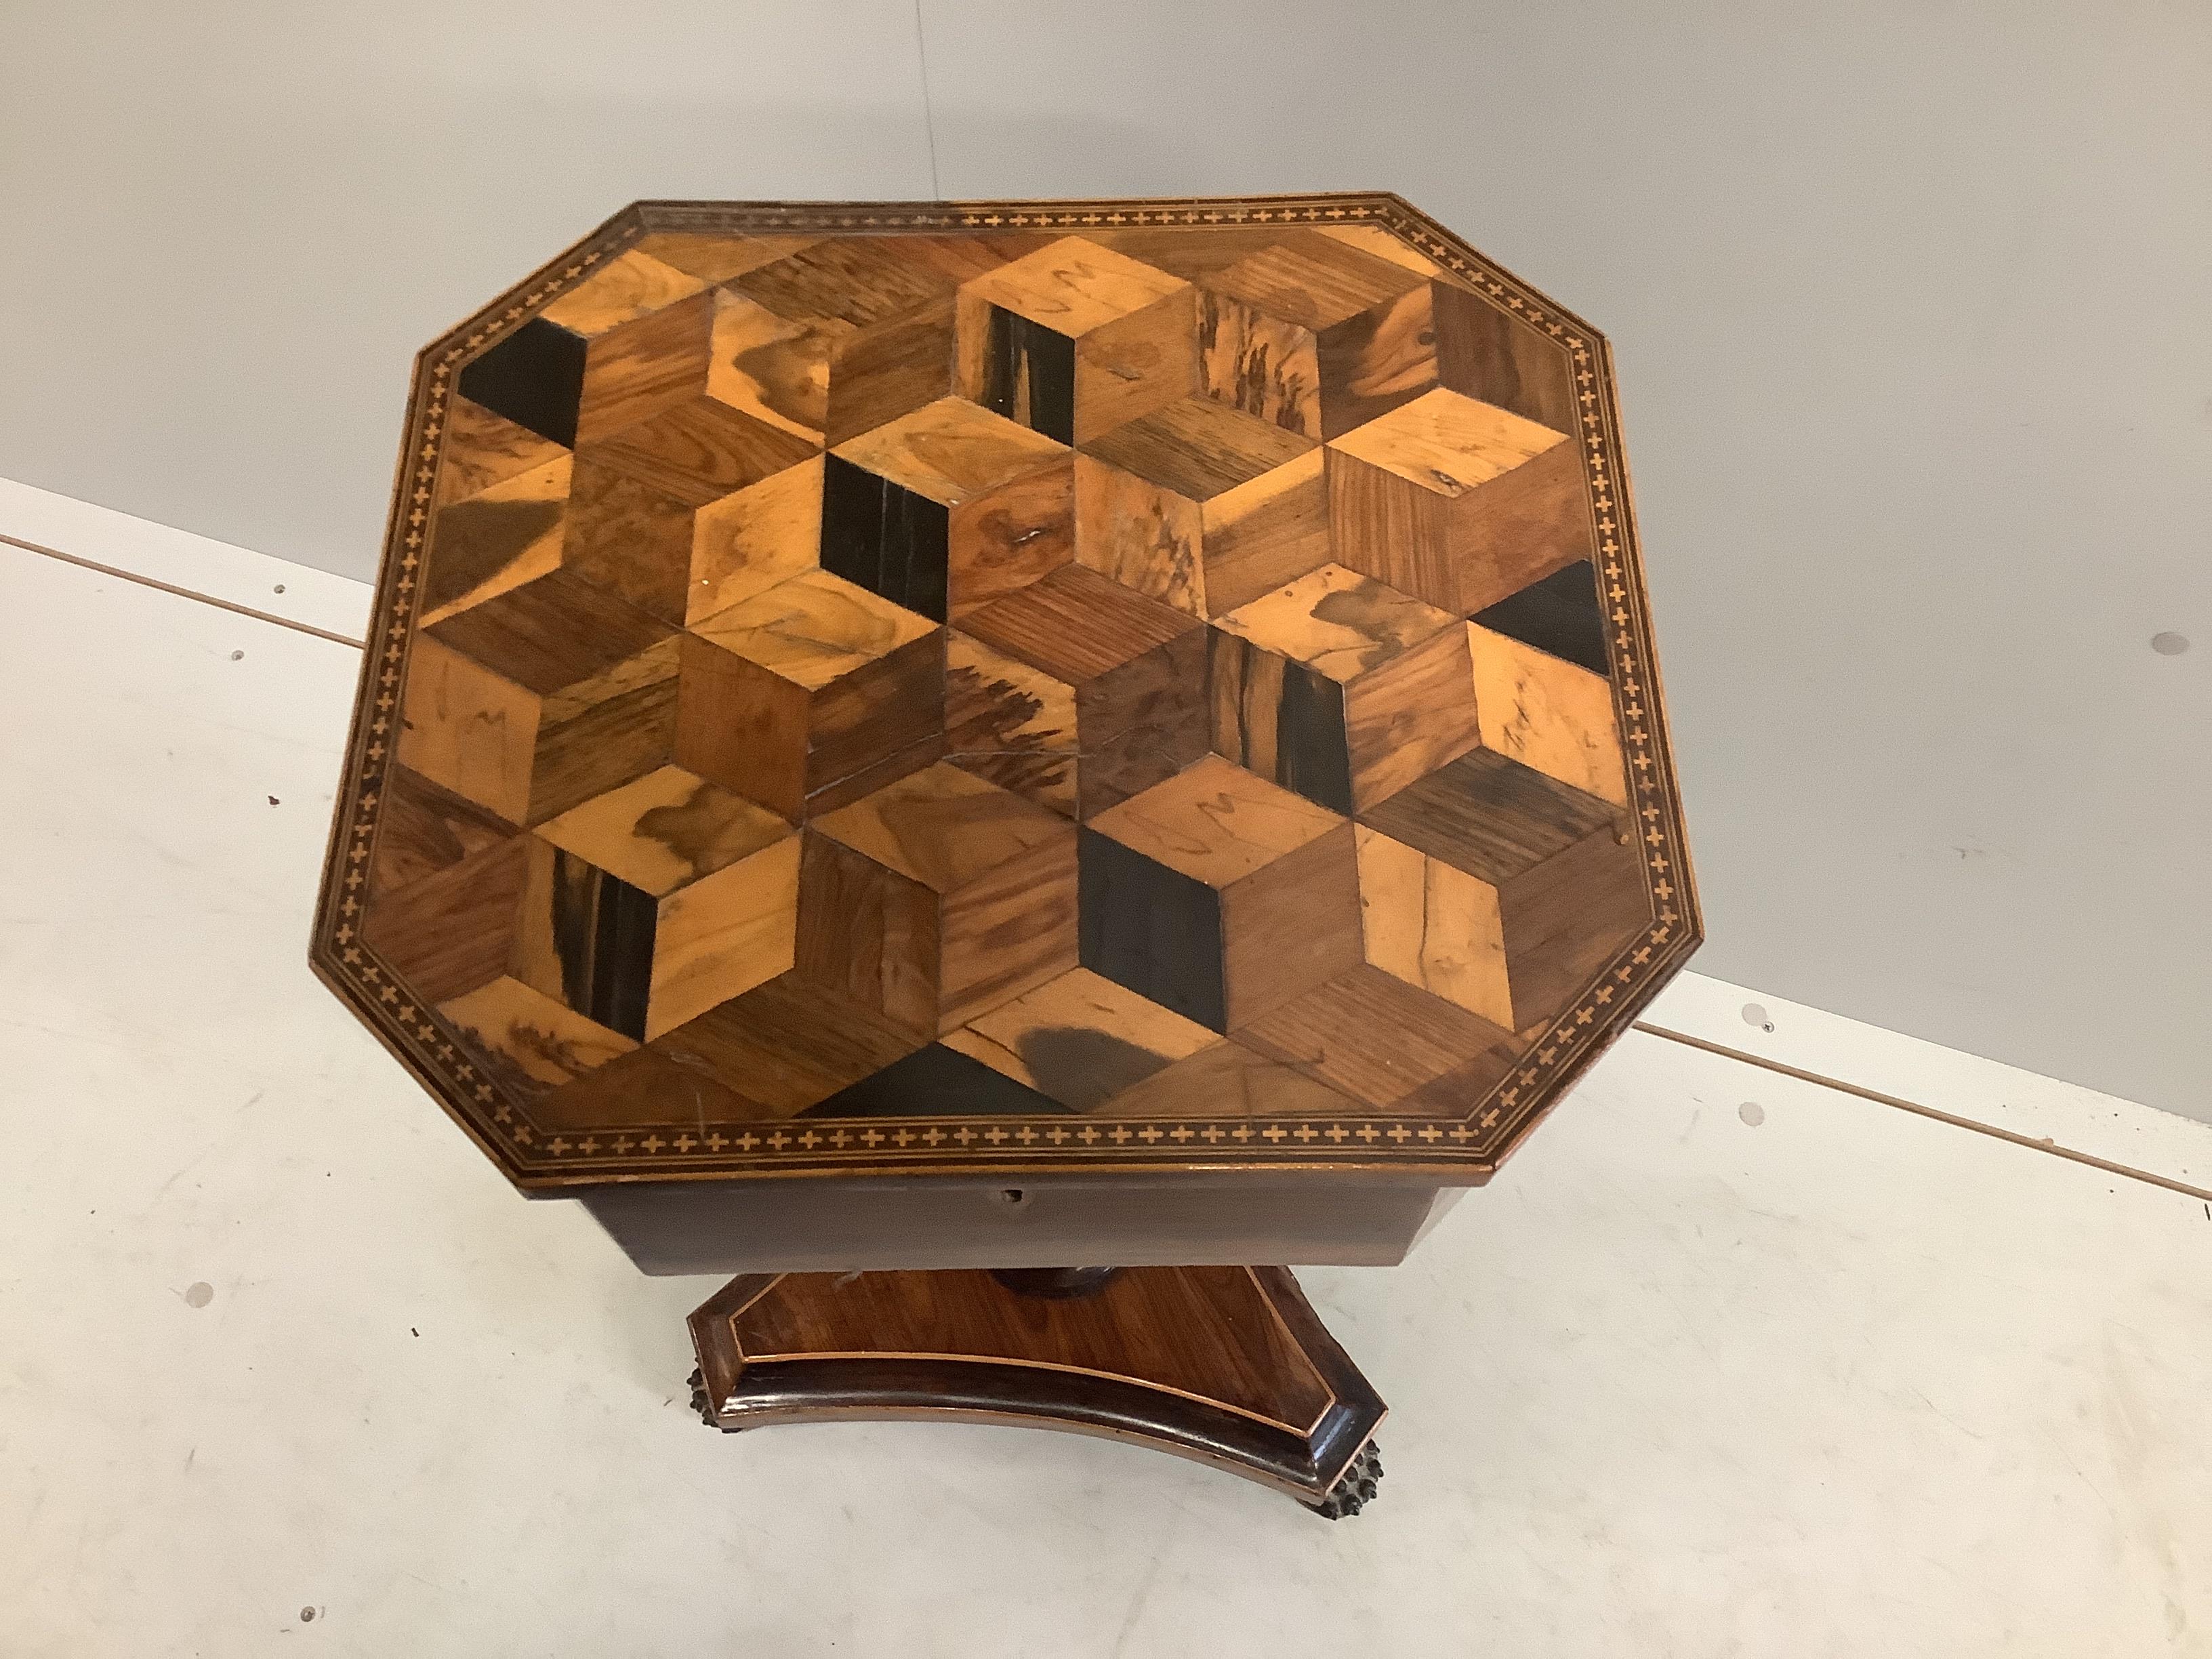 An early 19th century parquetry inlaid octagonal rosewood teapoy, width 38cm, depth 34cm, height 73cm